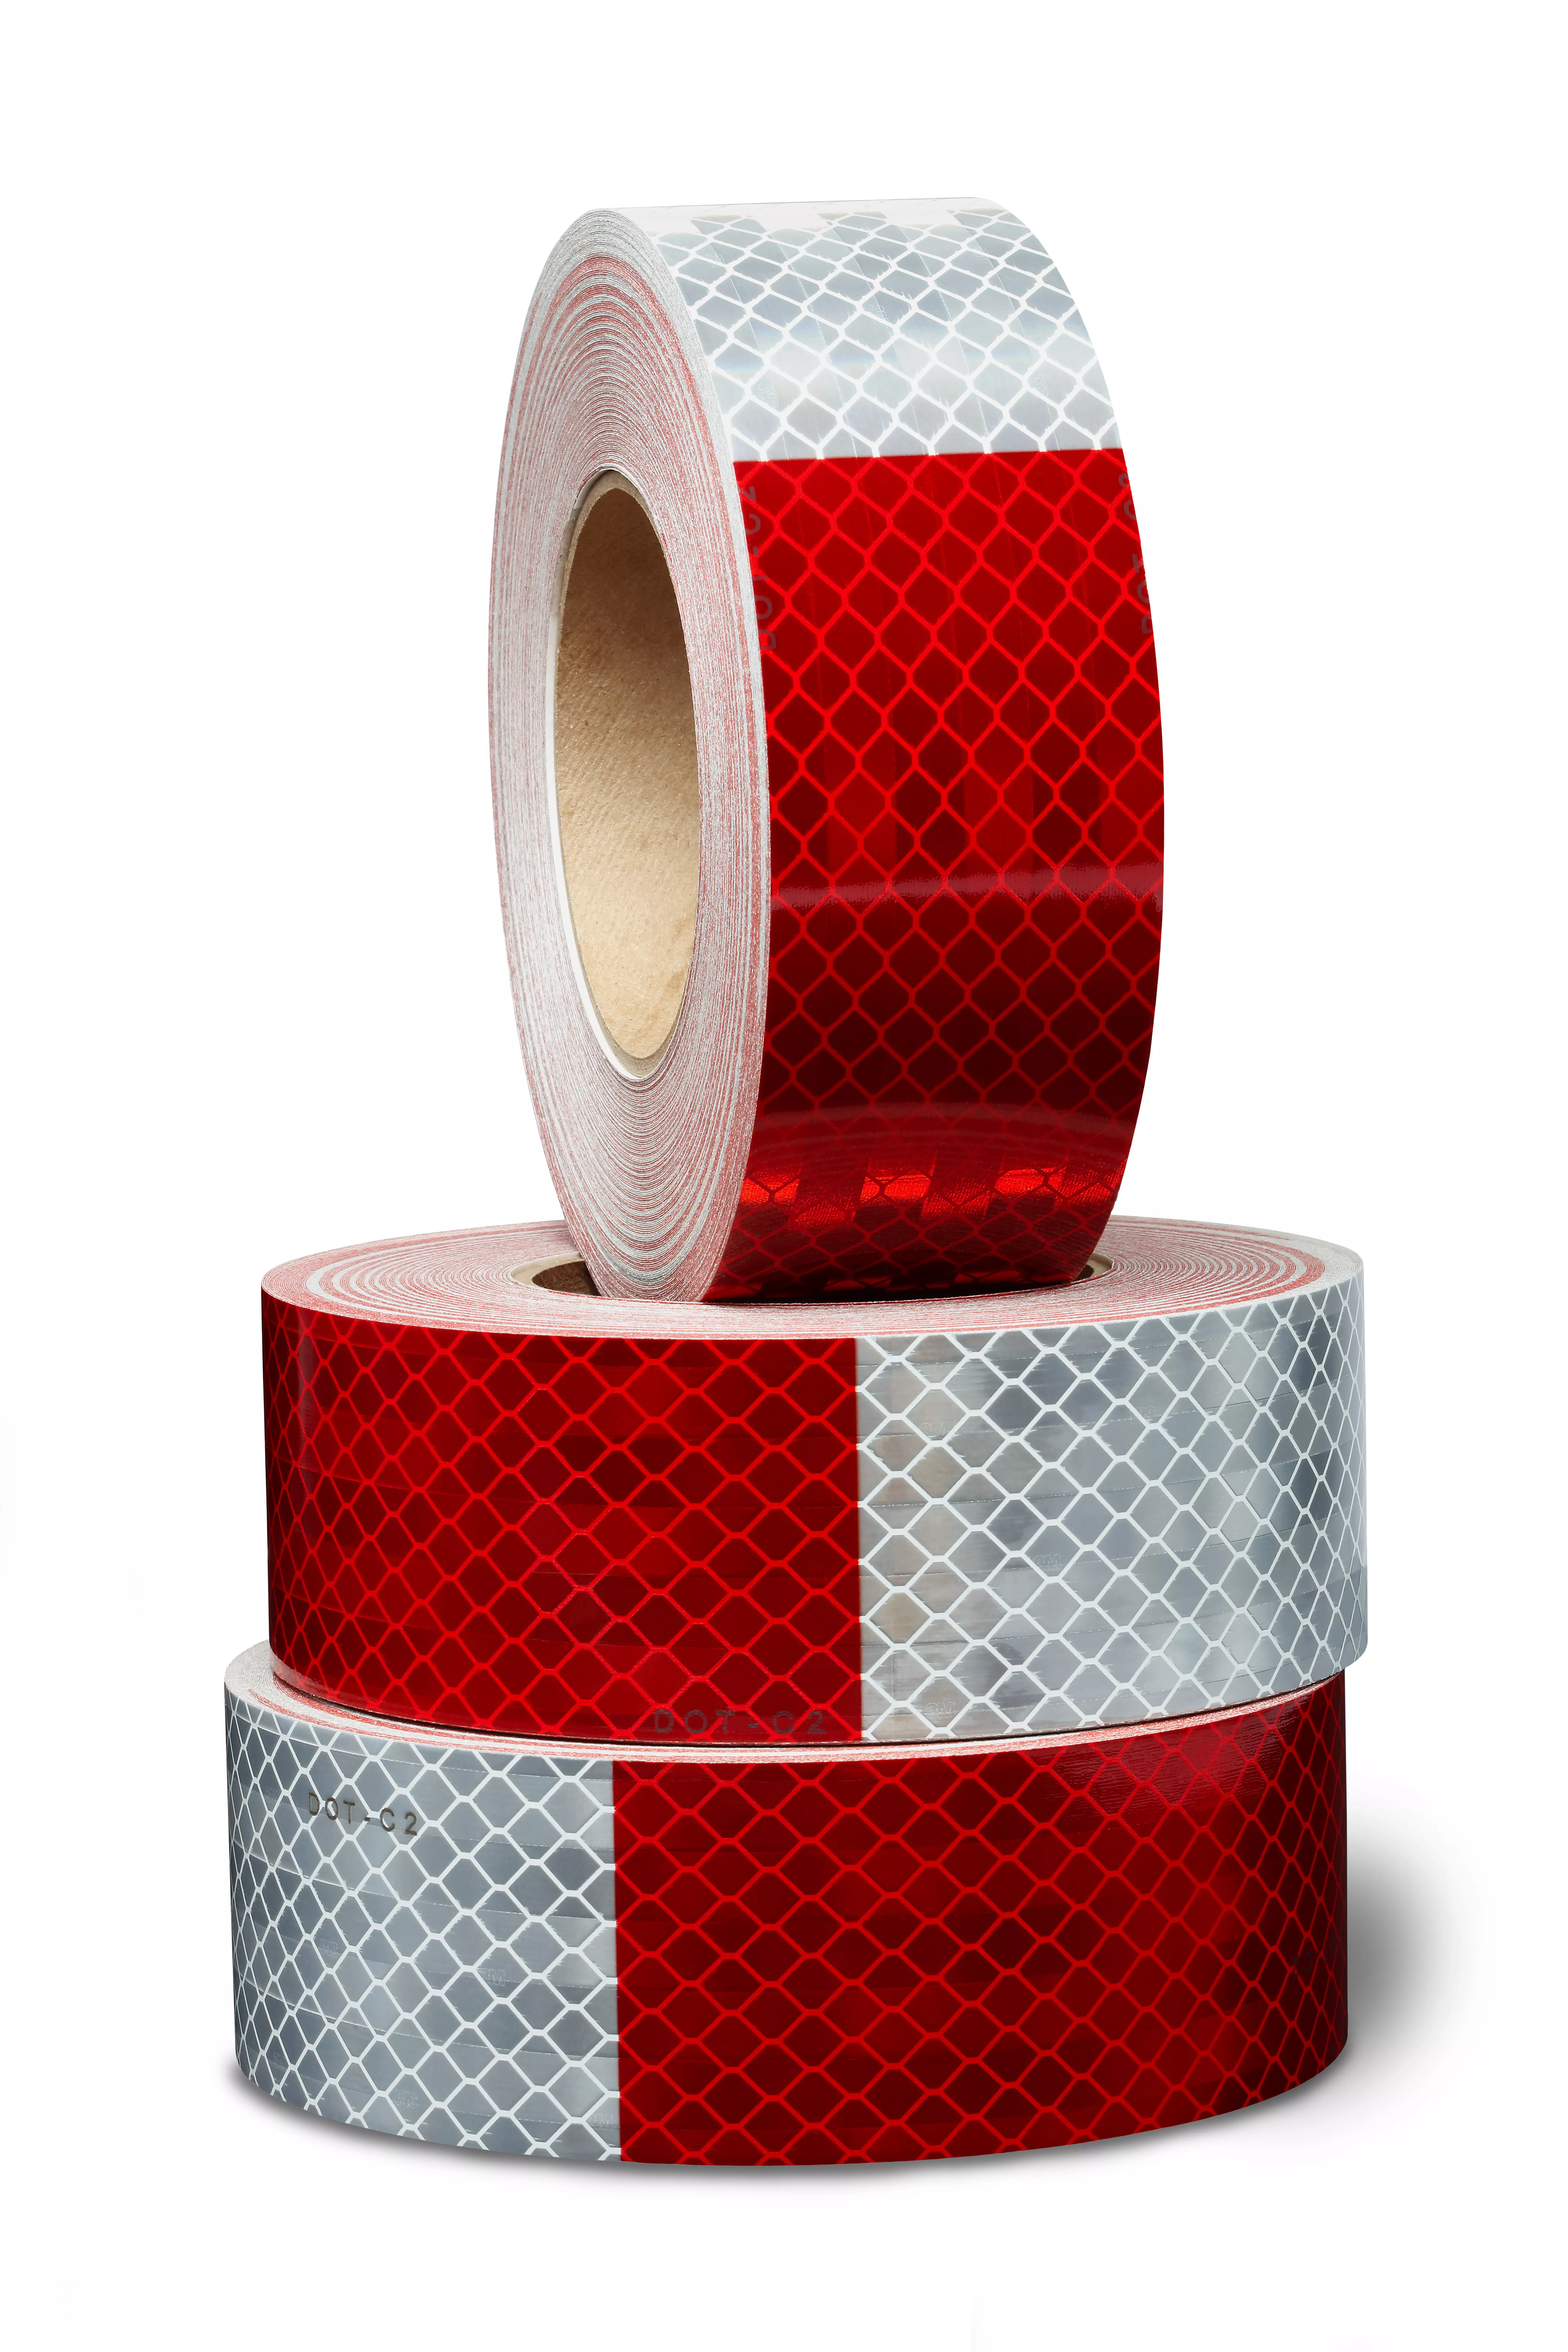 SKU 7100175825 | 3M™ Flexible Prismatic Conspicuity Markings 913-326NL Red/White